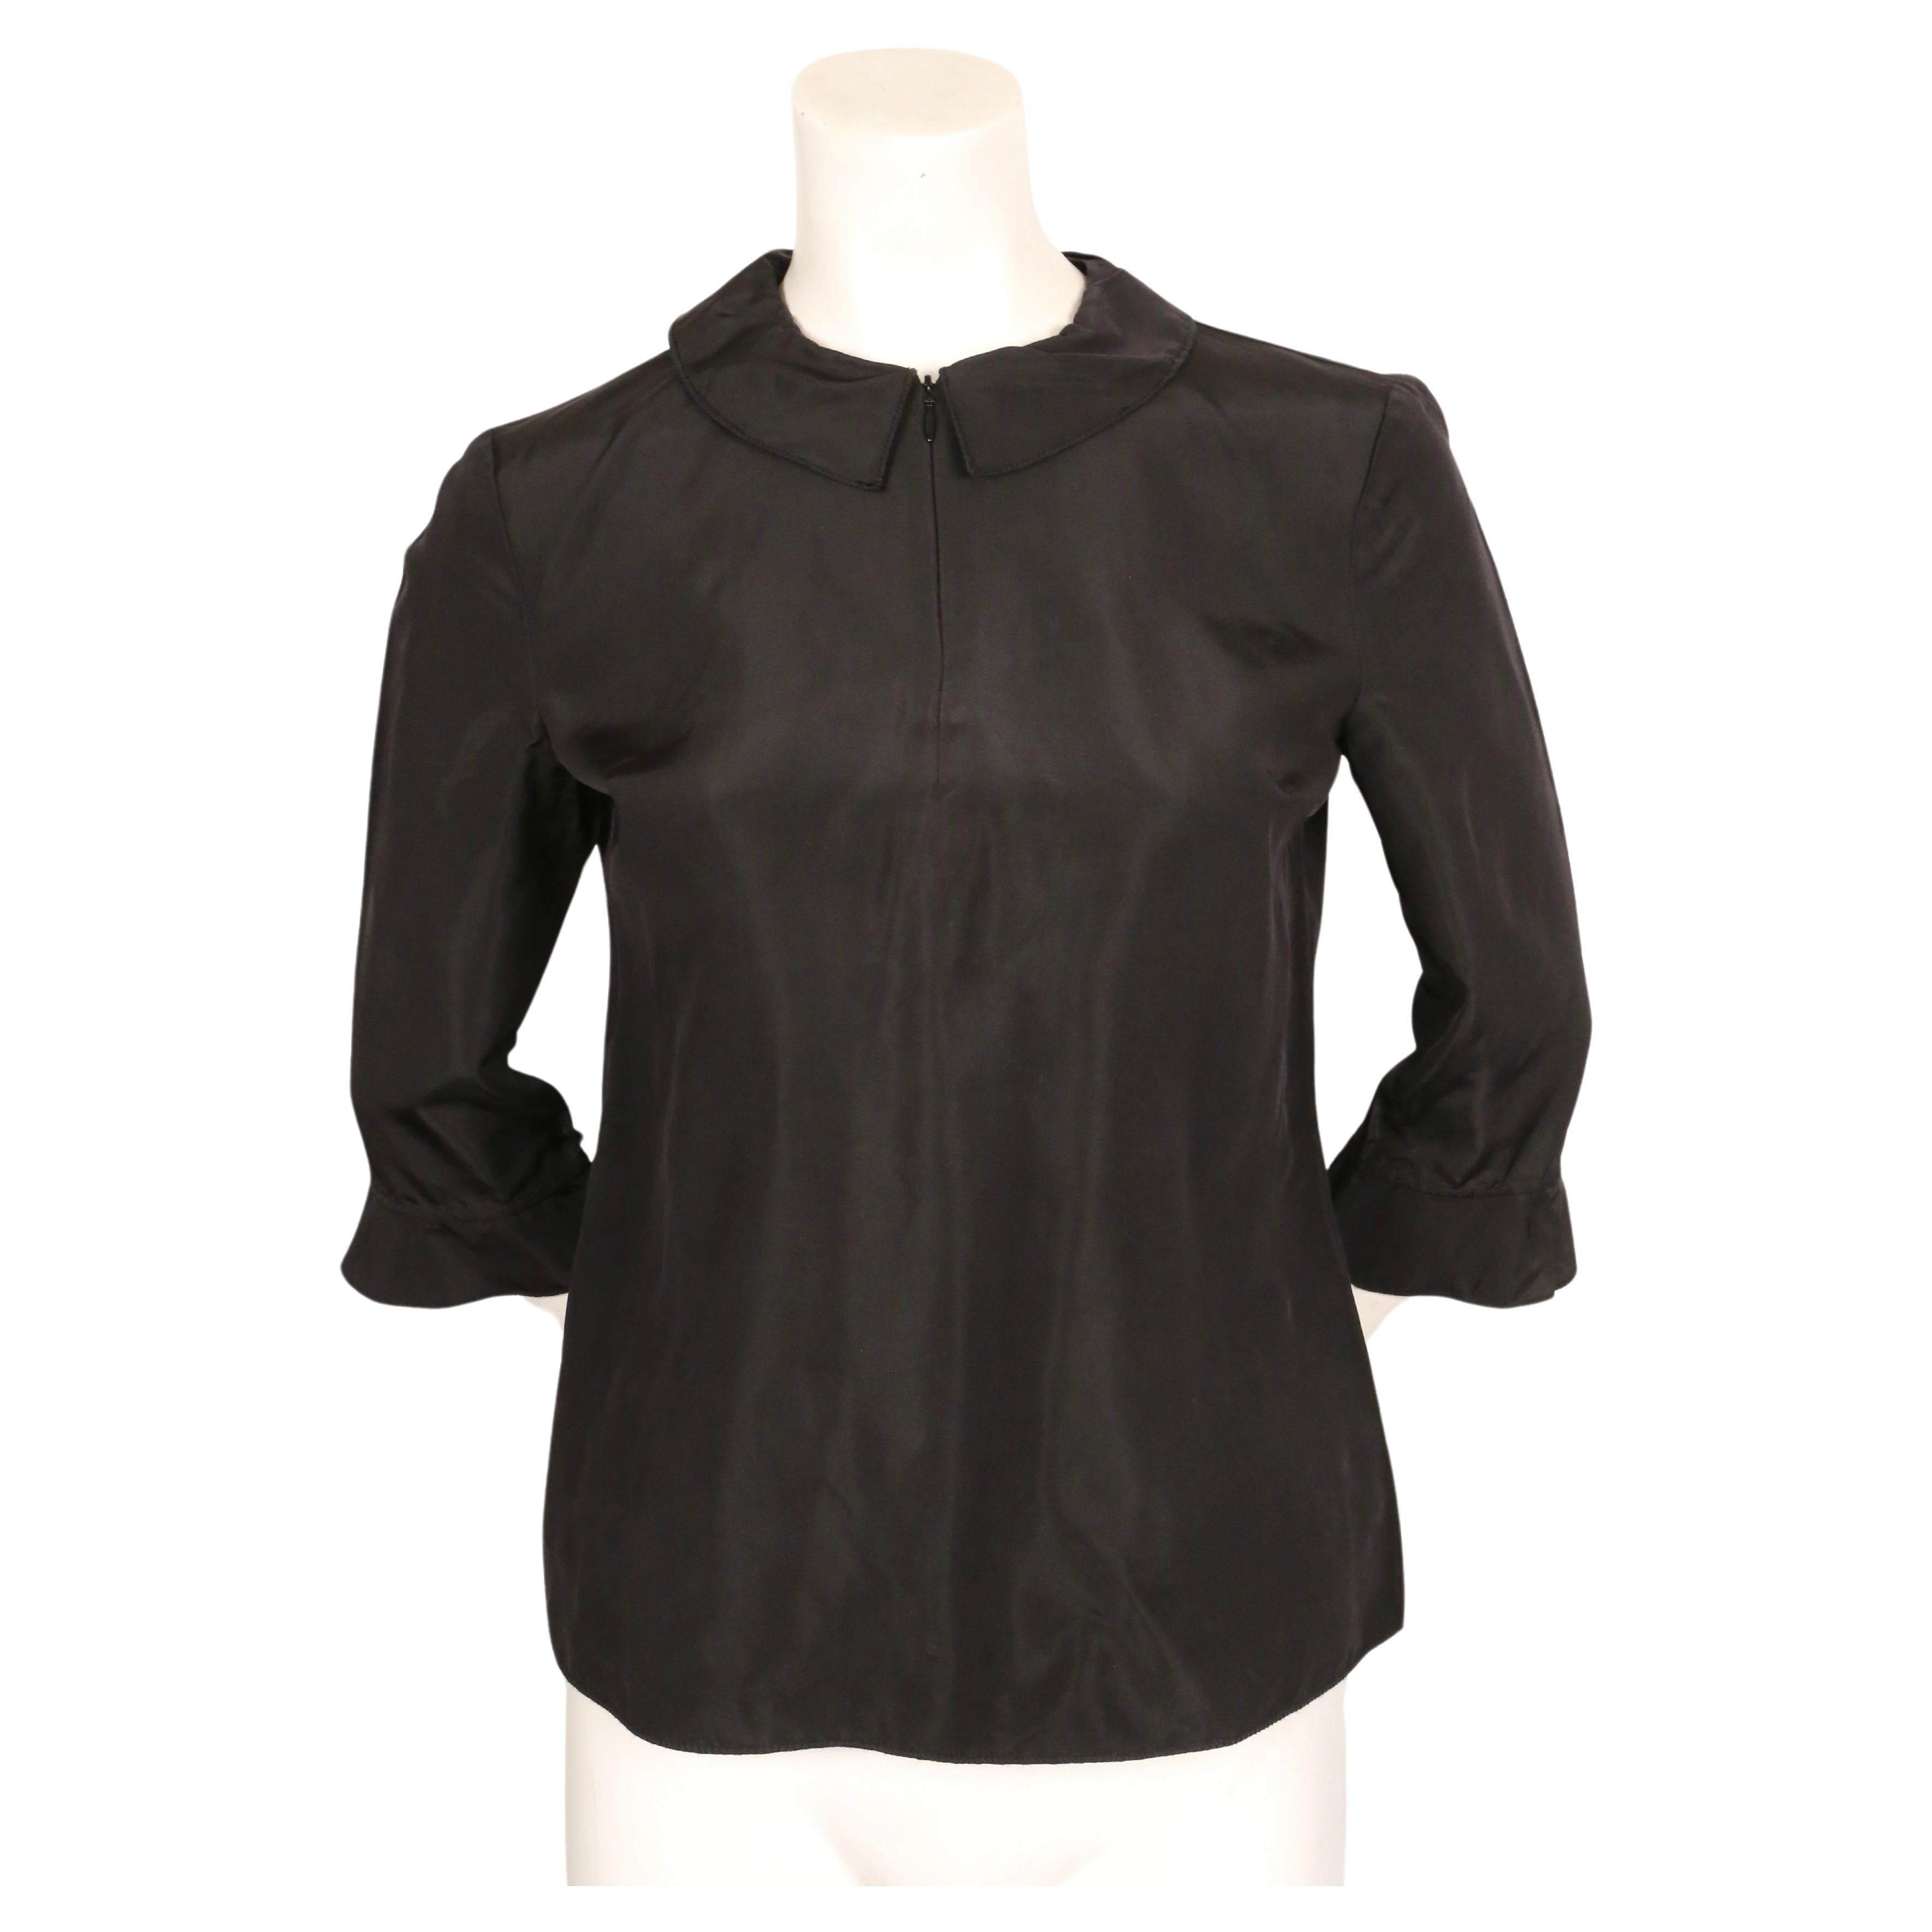 Minimalist black top with ruffled collar and cuffs designed by Miuccia Prada for MIU MIU dating to fall of 1998 as seen on the runway in an alternate color. Labeled a size 40. Approximate measurements: shoulder 15